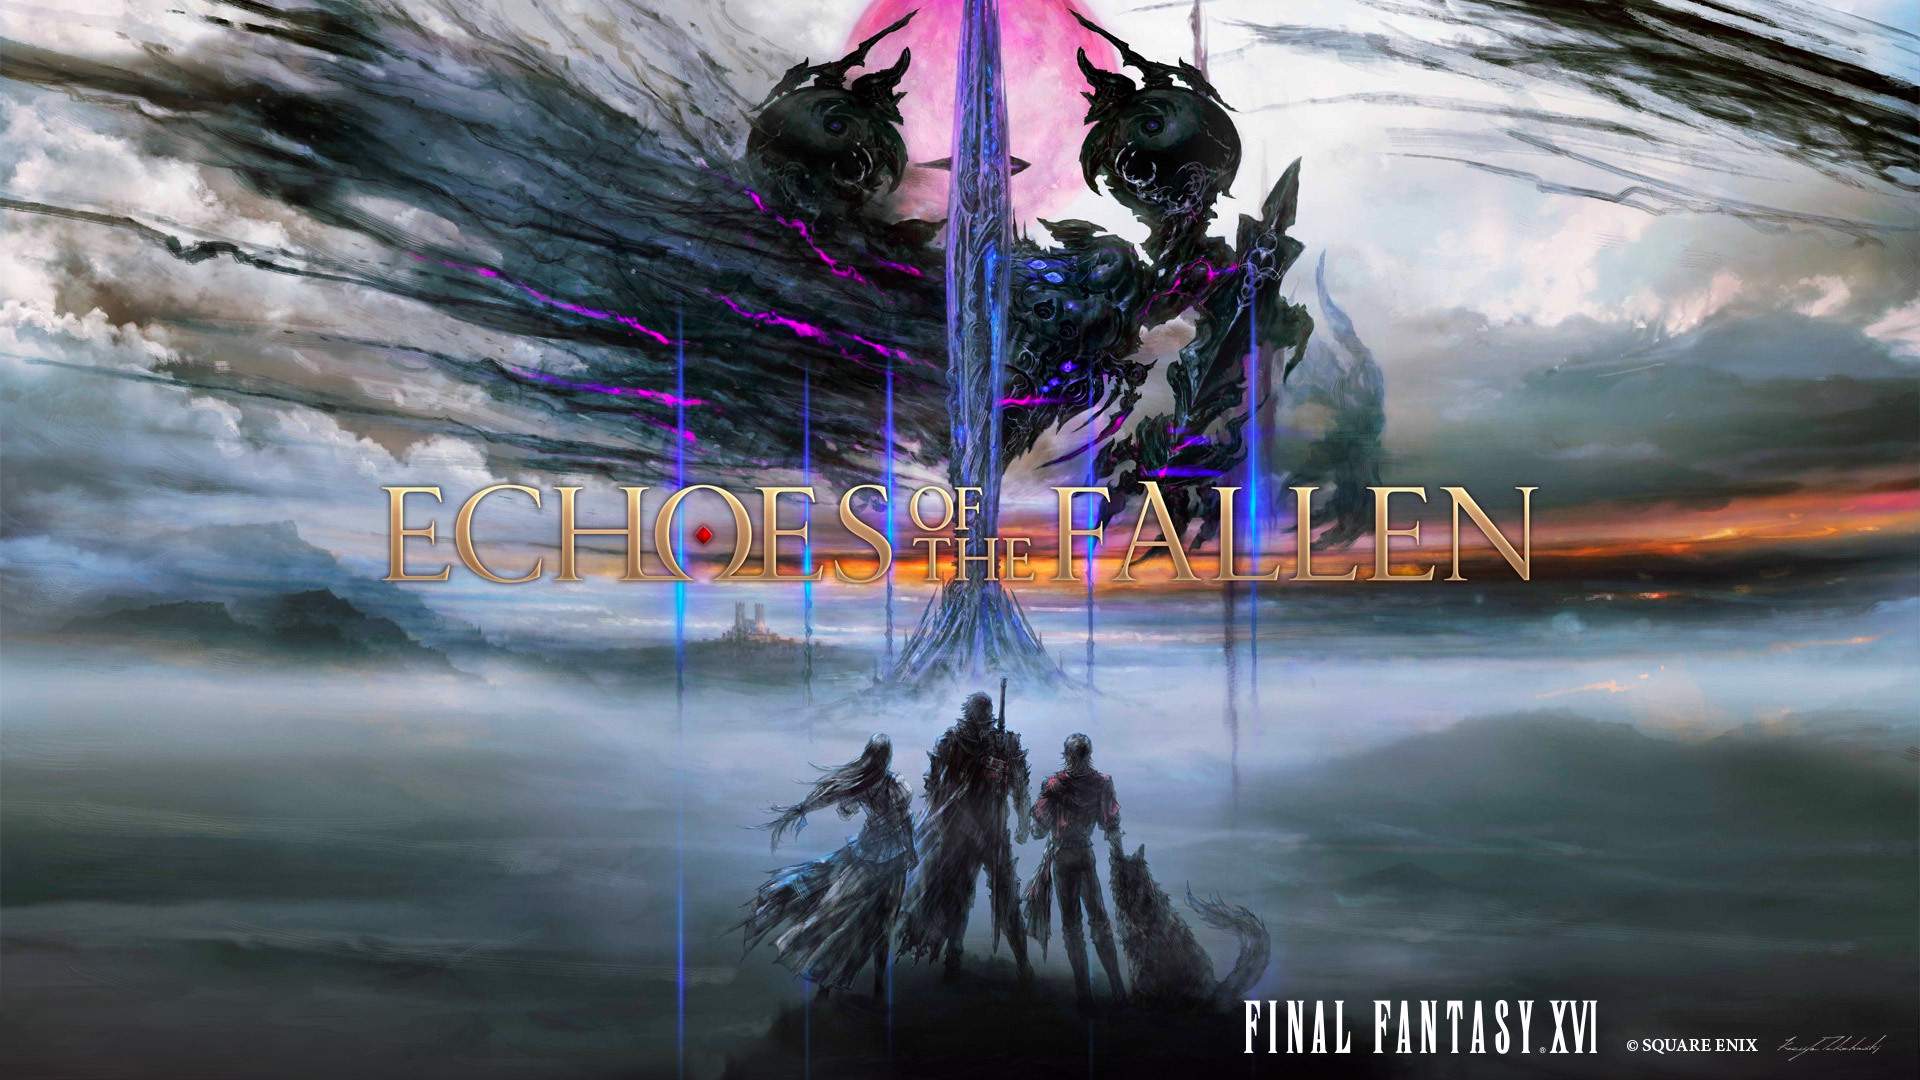 Final Fantasy XVI Paid DLC “Echoes Of The Fallen” Now Available